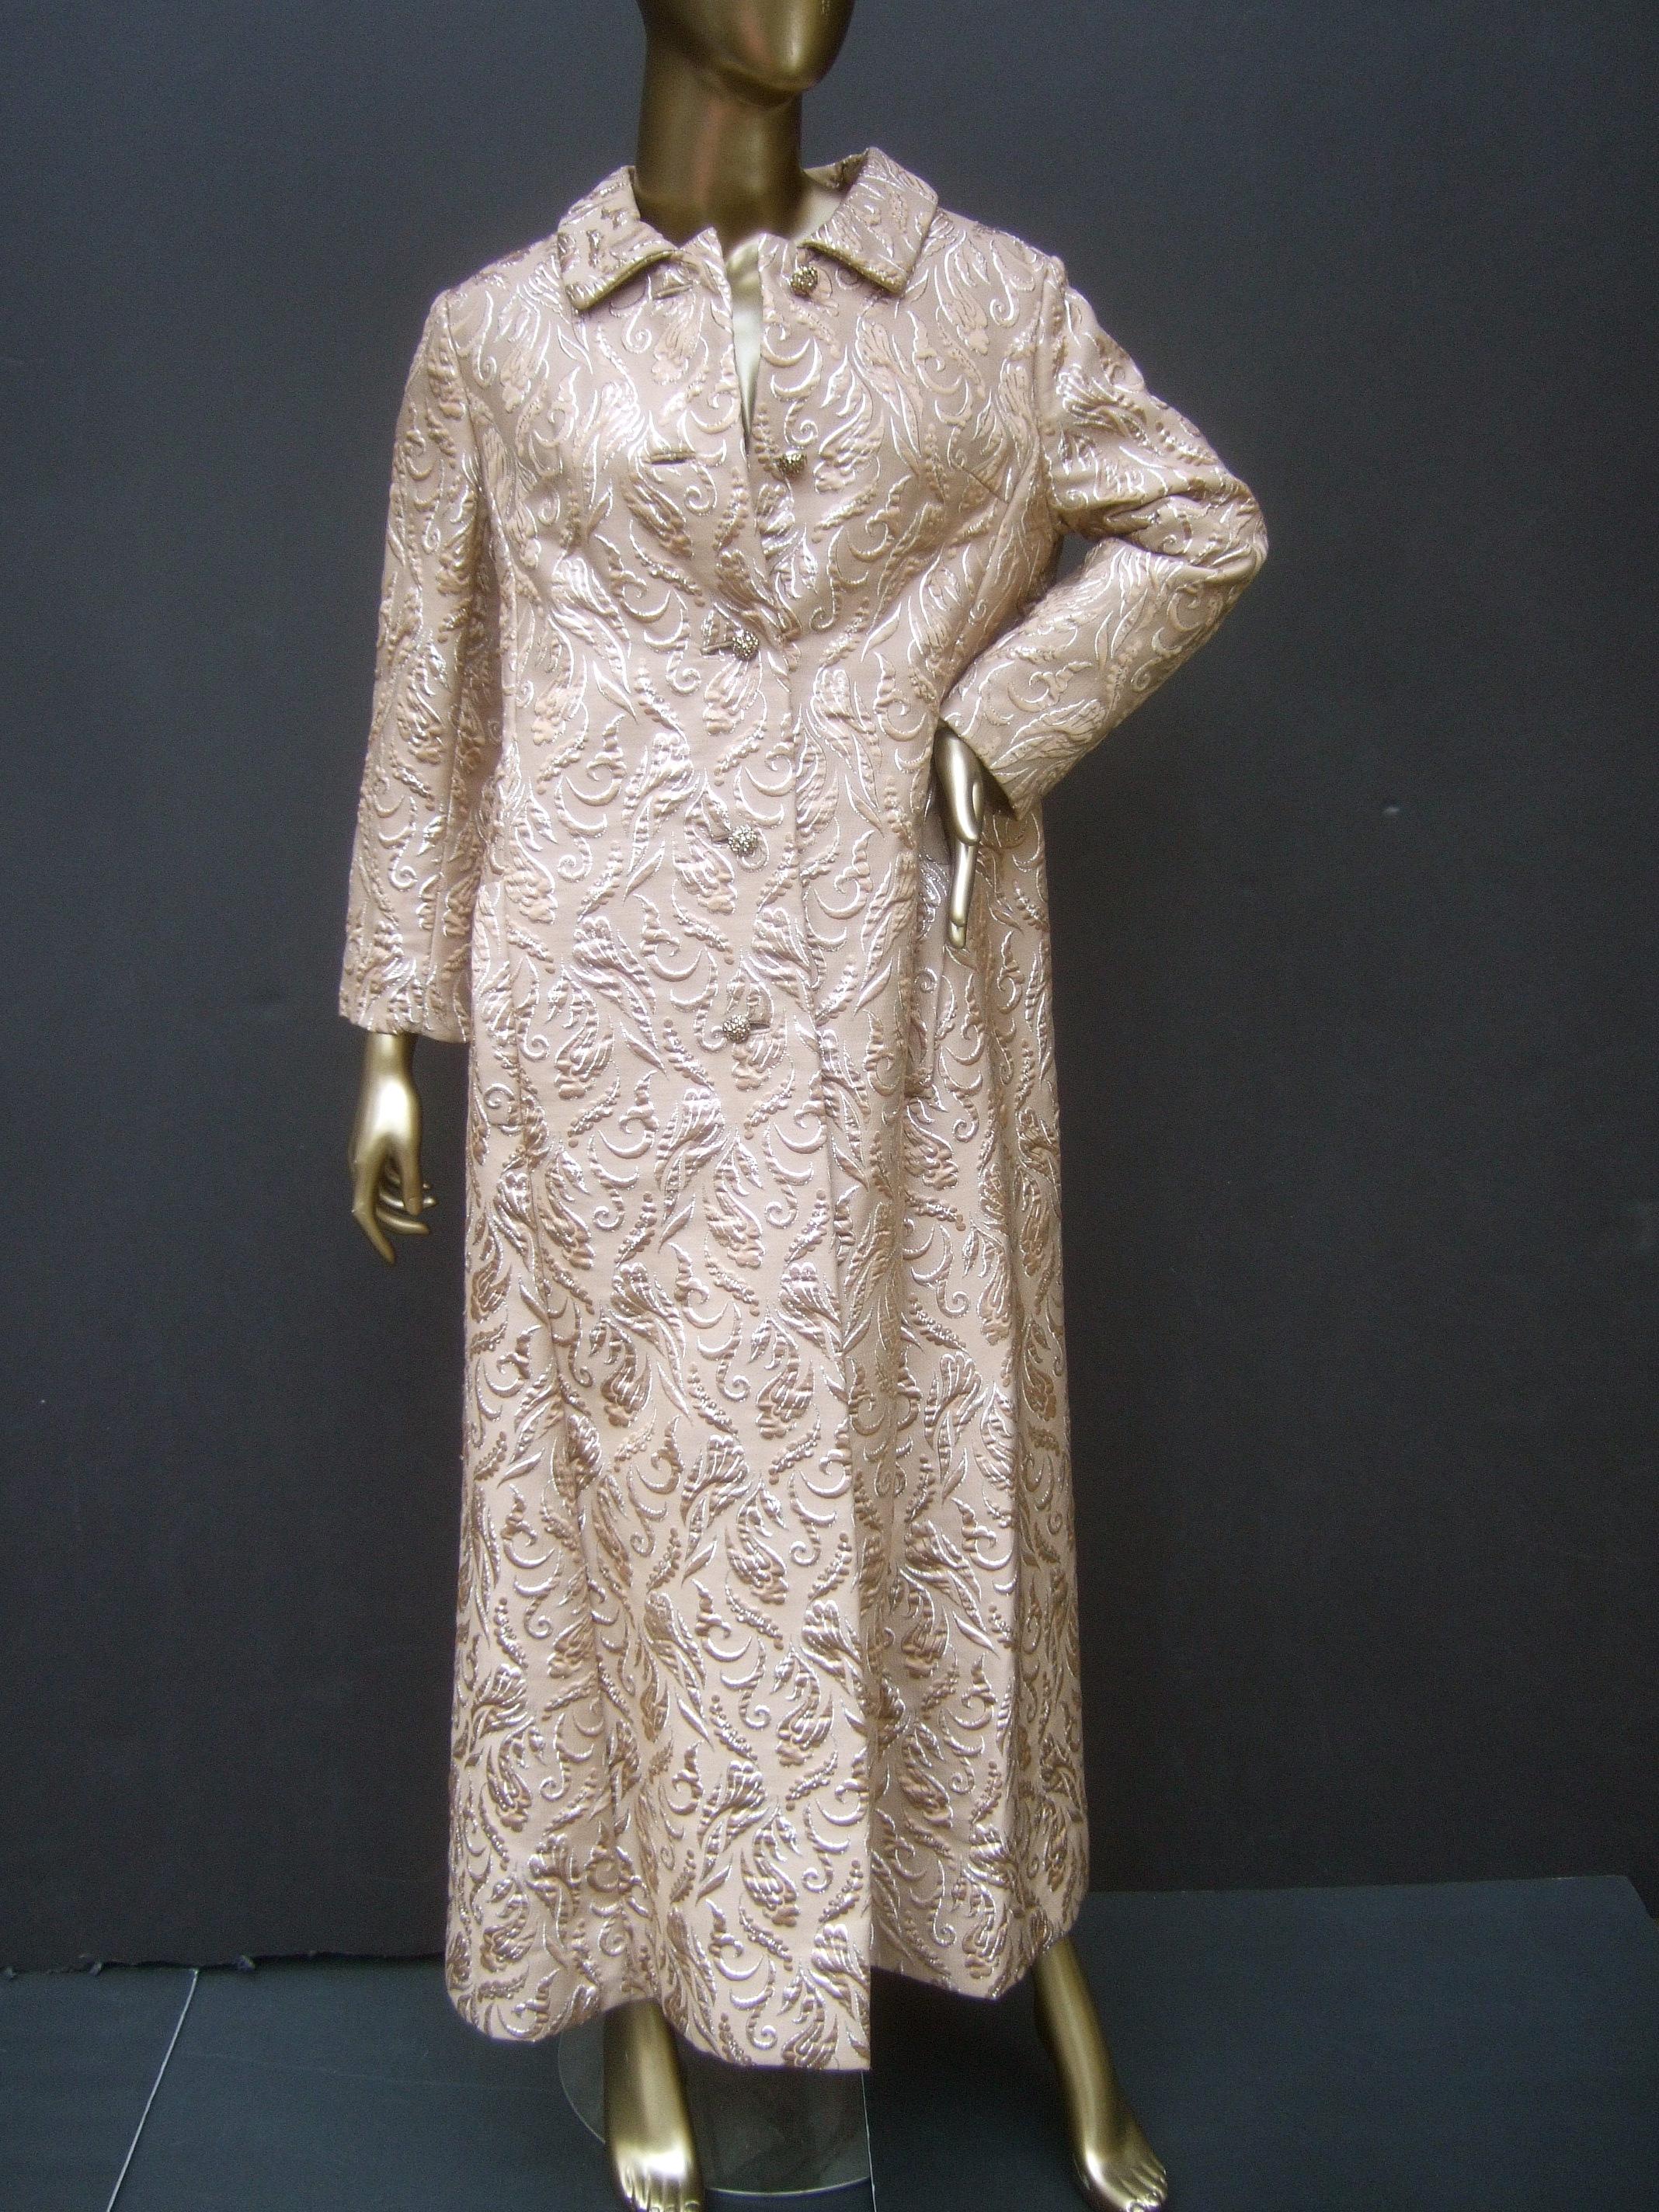 Opulent mocha brown brocade evening coat by Montaldo's c 1960s
The elegant opera coat is designed with thick structured brocade panels
The luminous mocha brown brocade fabric is illuminated with sinuous 
swirls of silver metallic

Adorned with five